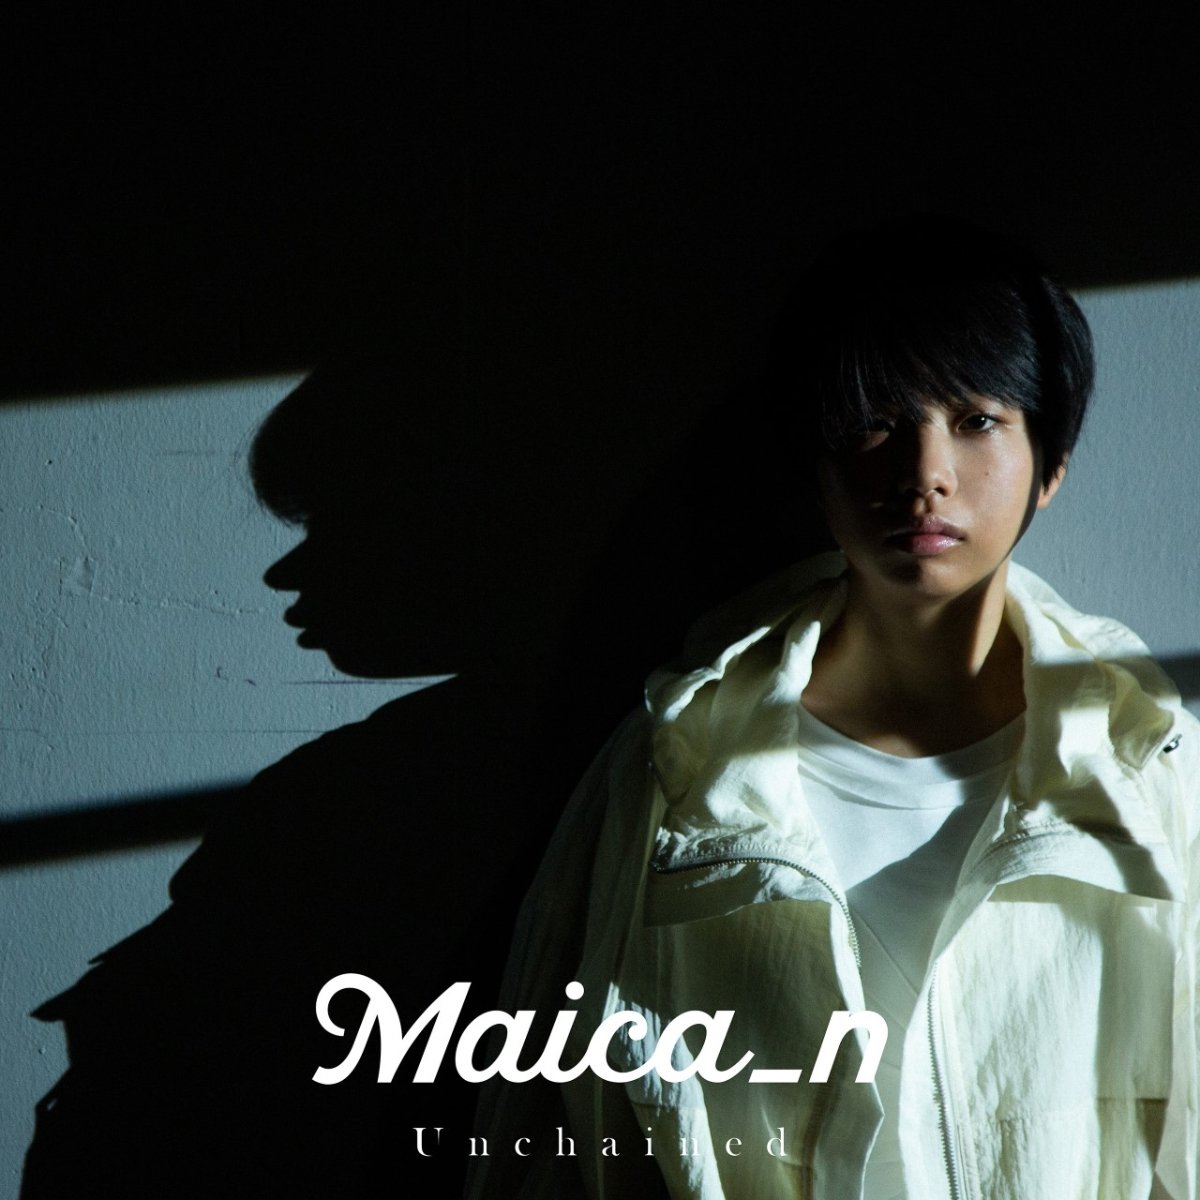 Unchained（初回限定盤／CD＋DVD） Maica＿n